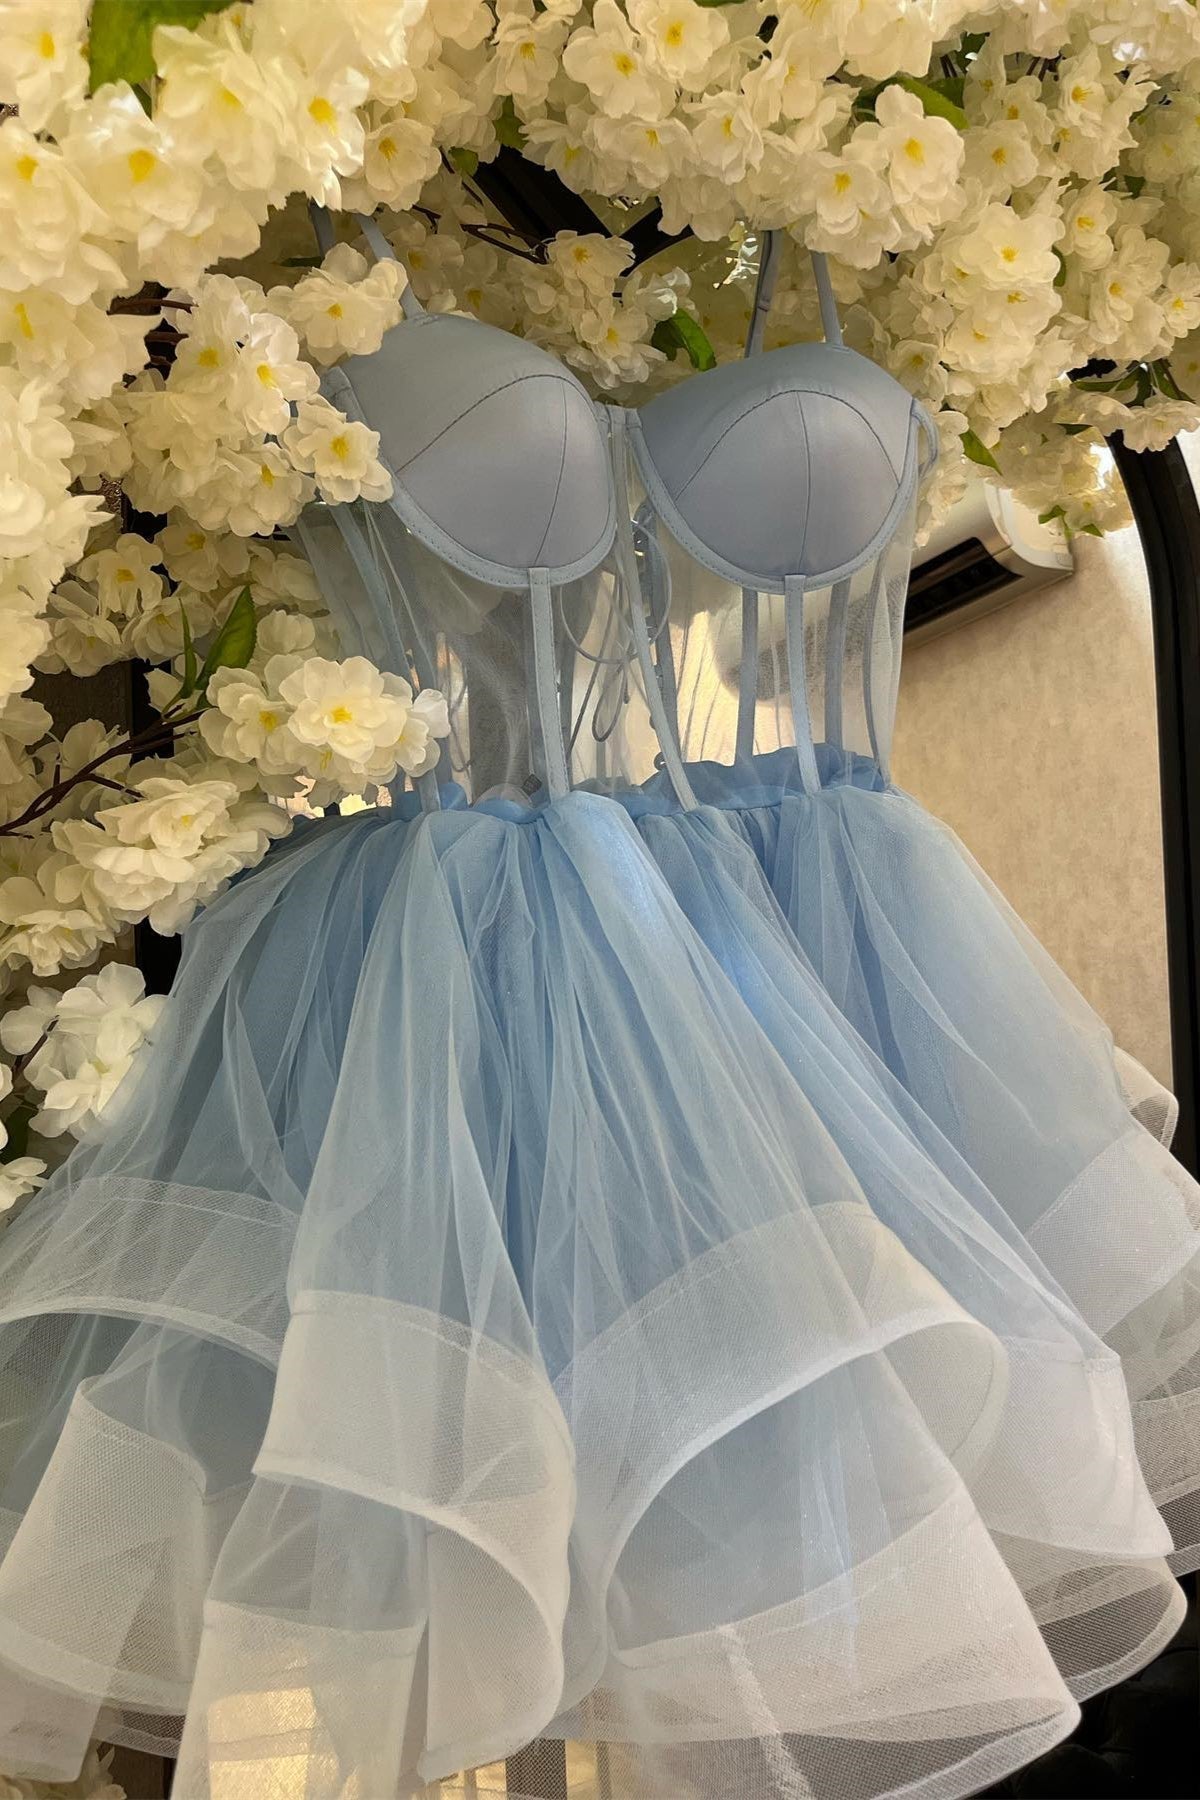 Homecoming Dresses Short, Light Blue A-line Illusion Tulle Homecoming Dress